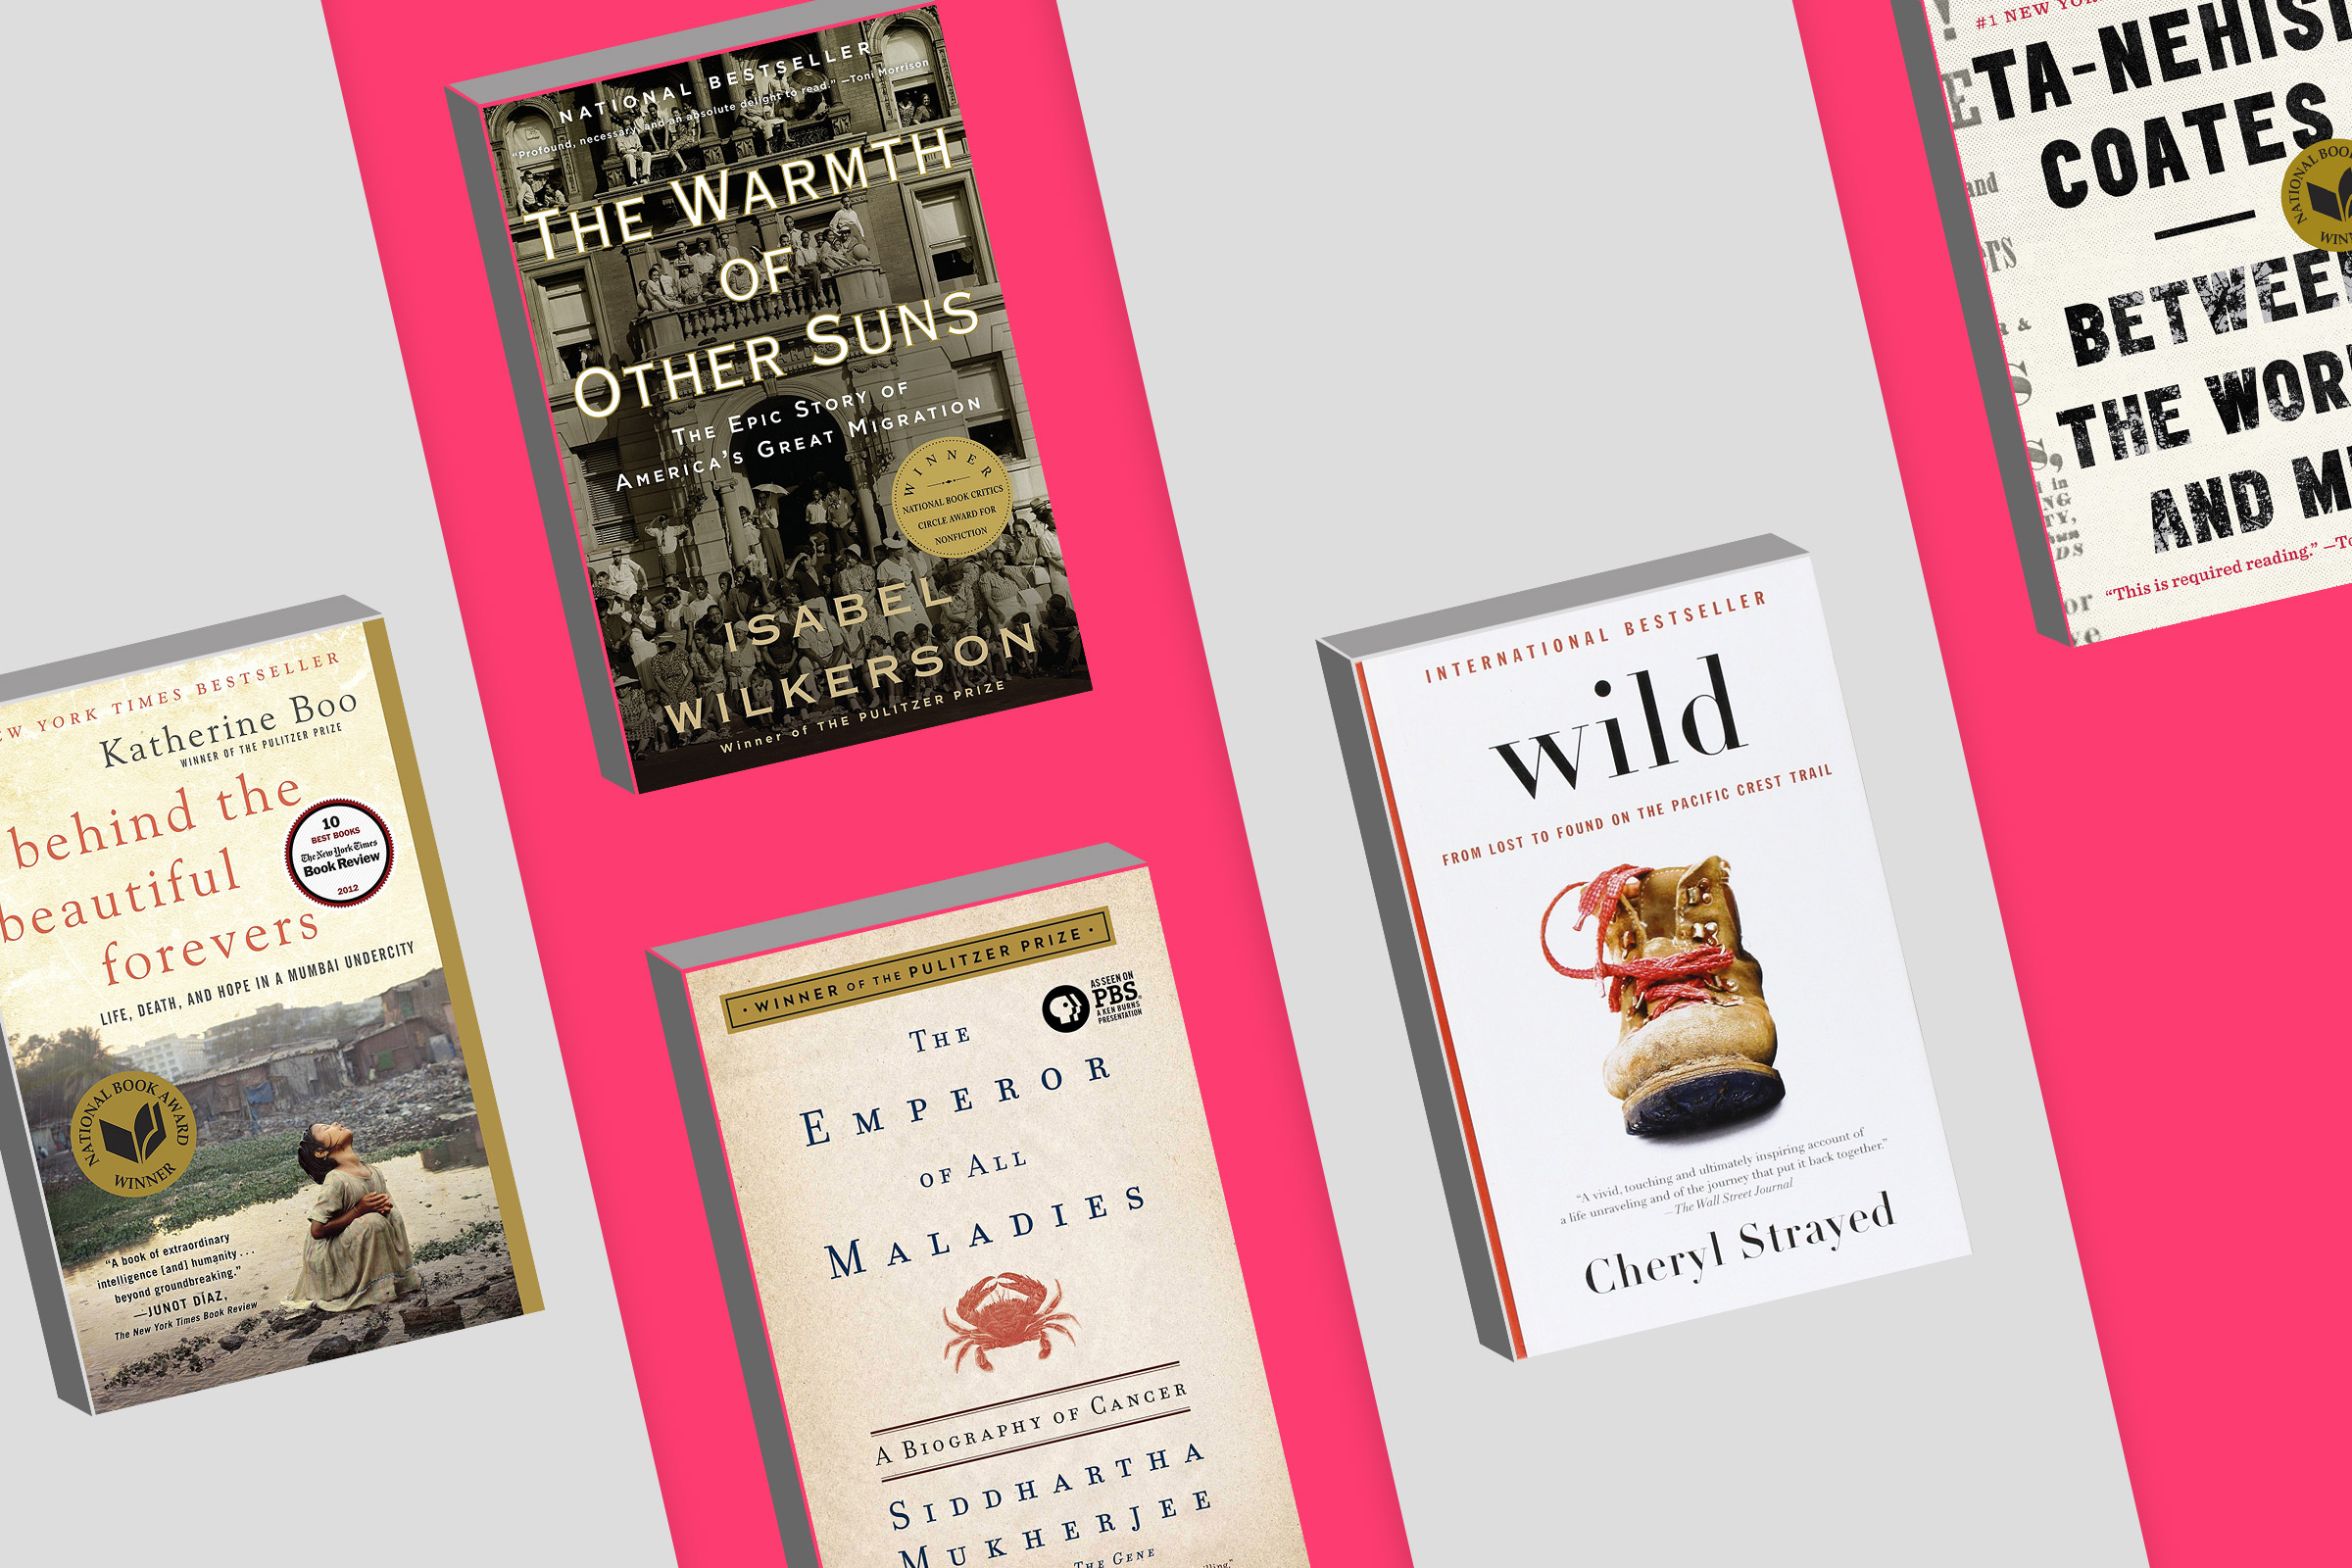 The 10 Best Nonfiction Books of the 2010s Decade